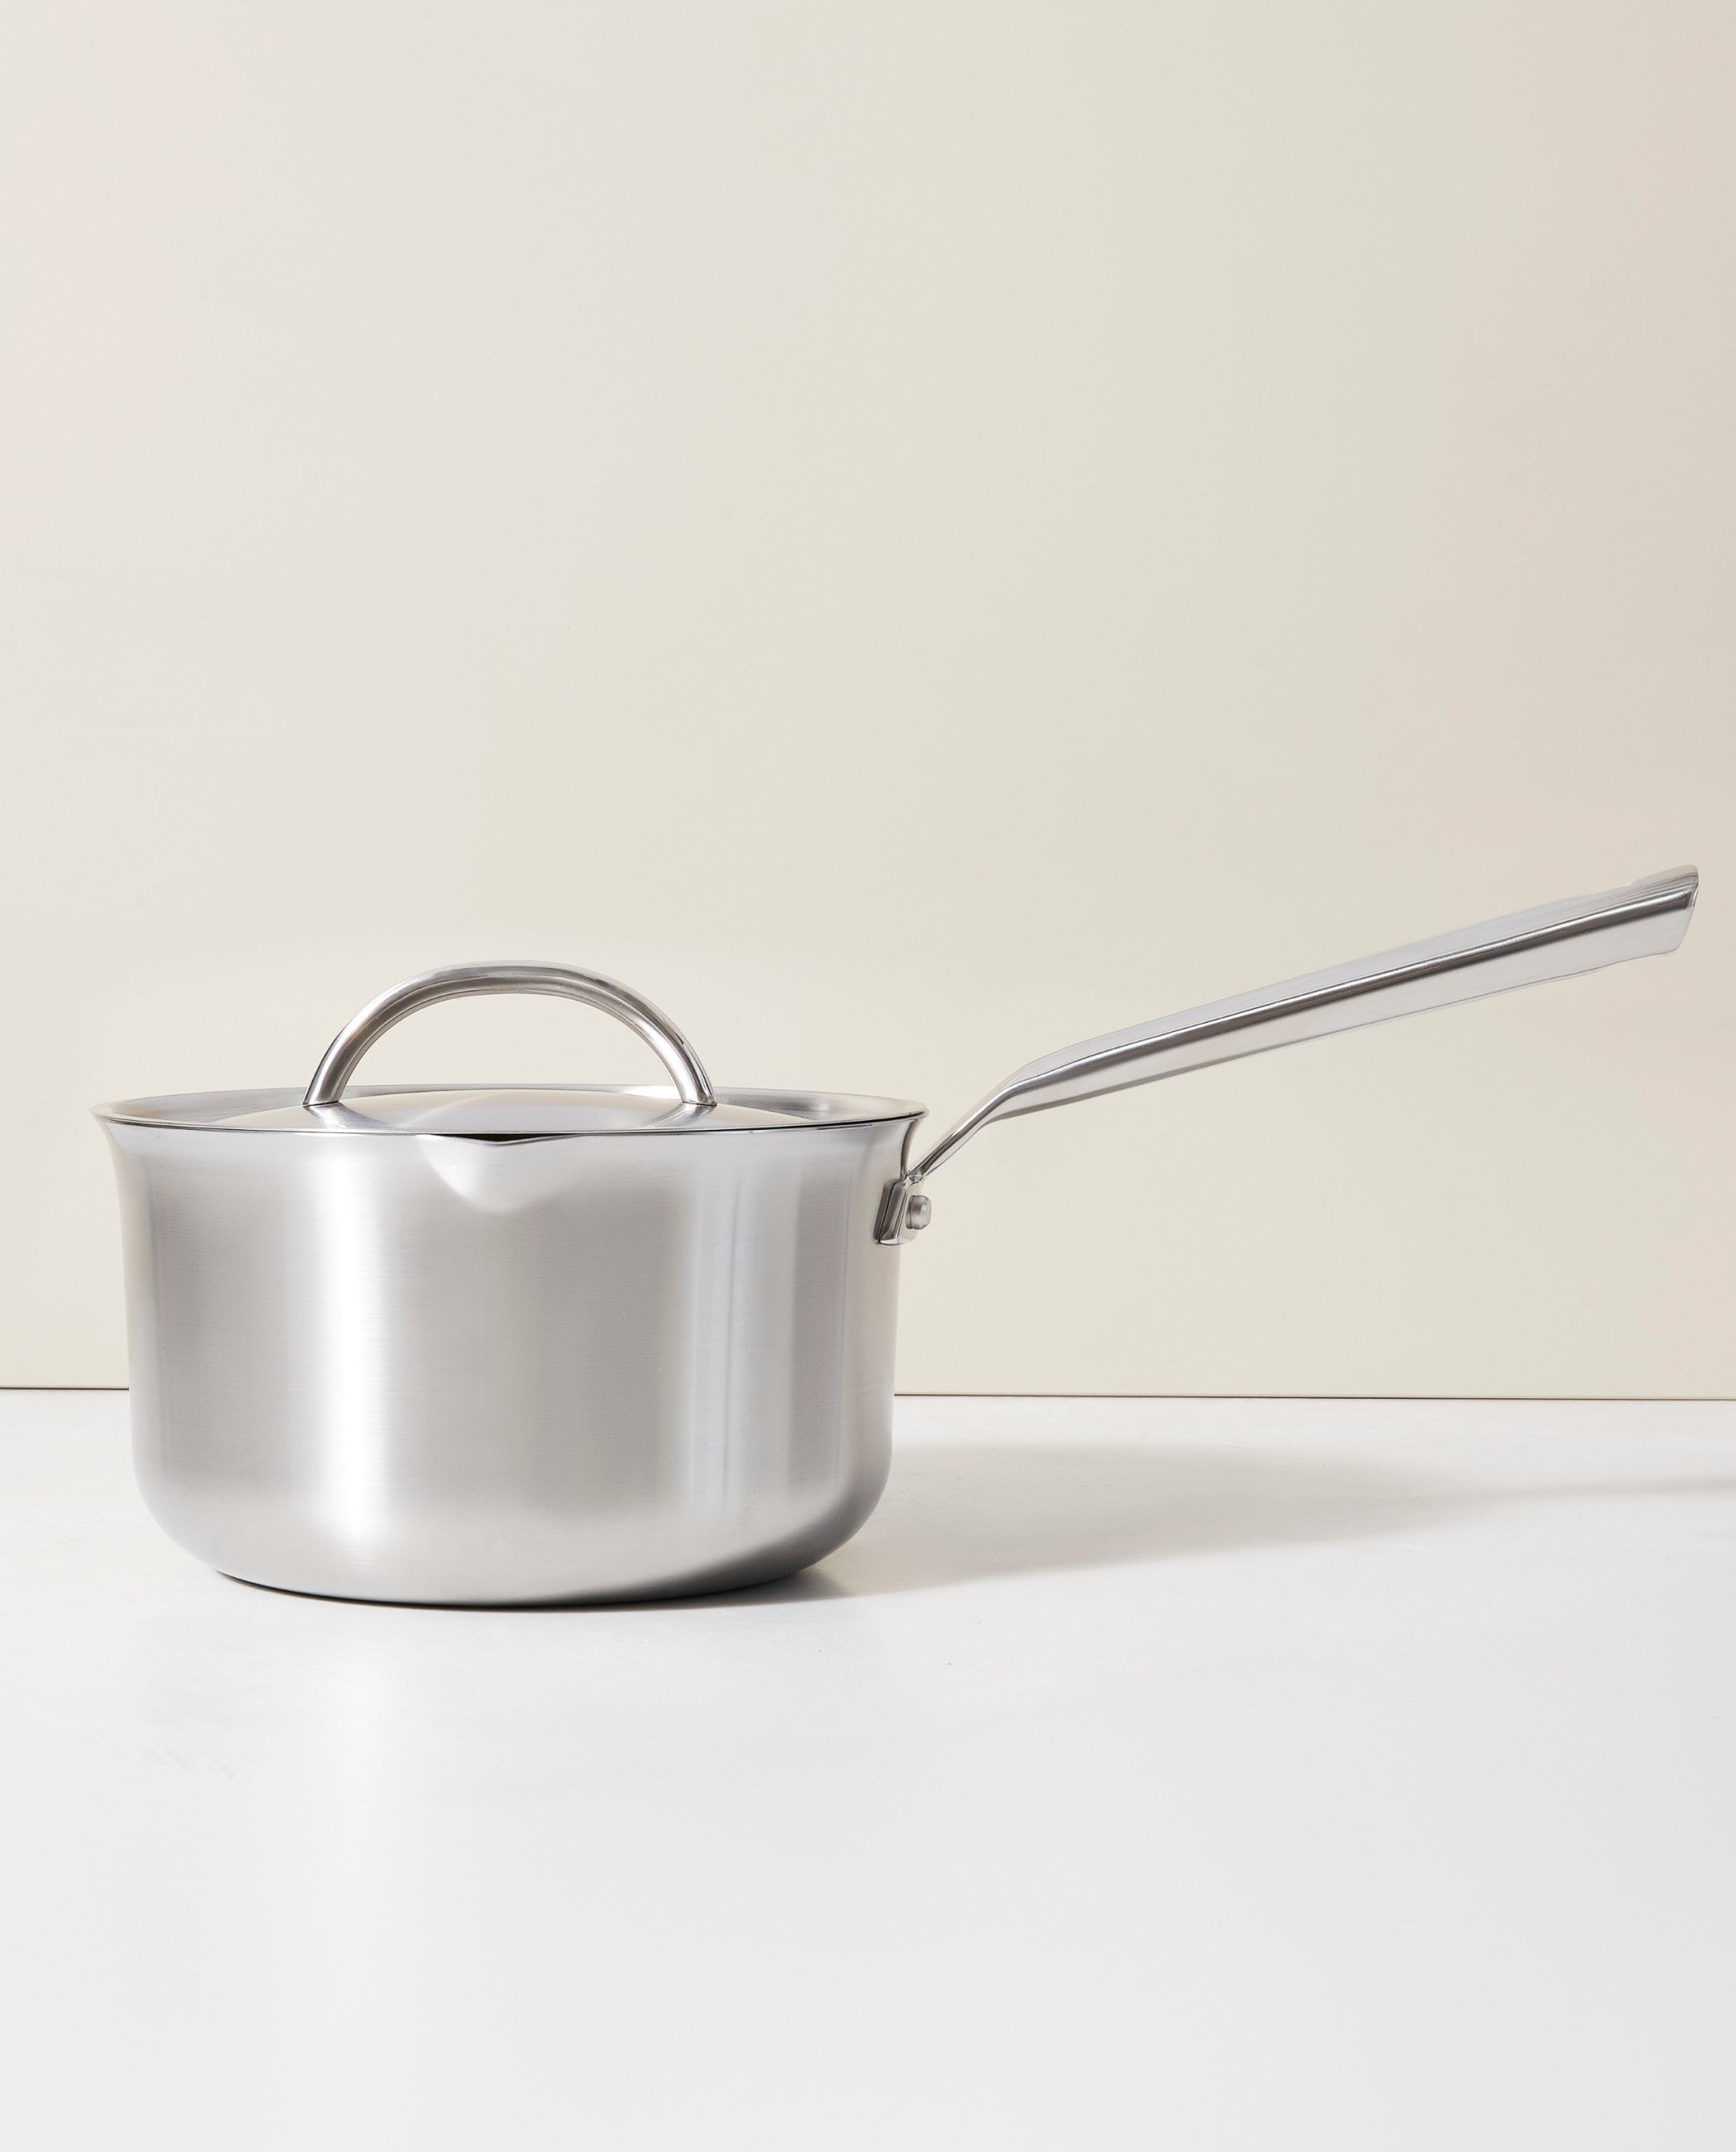 The Best Large Saucepans for Soups, Sauces, and More 